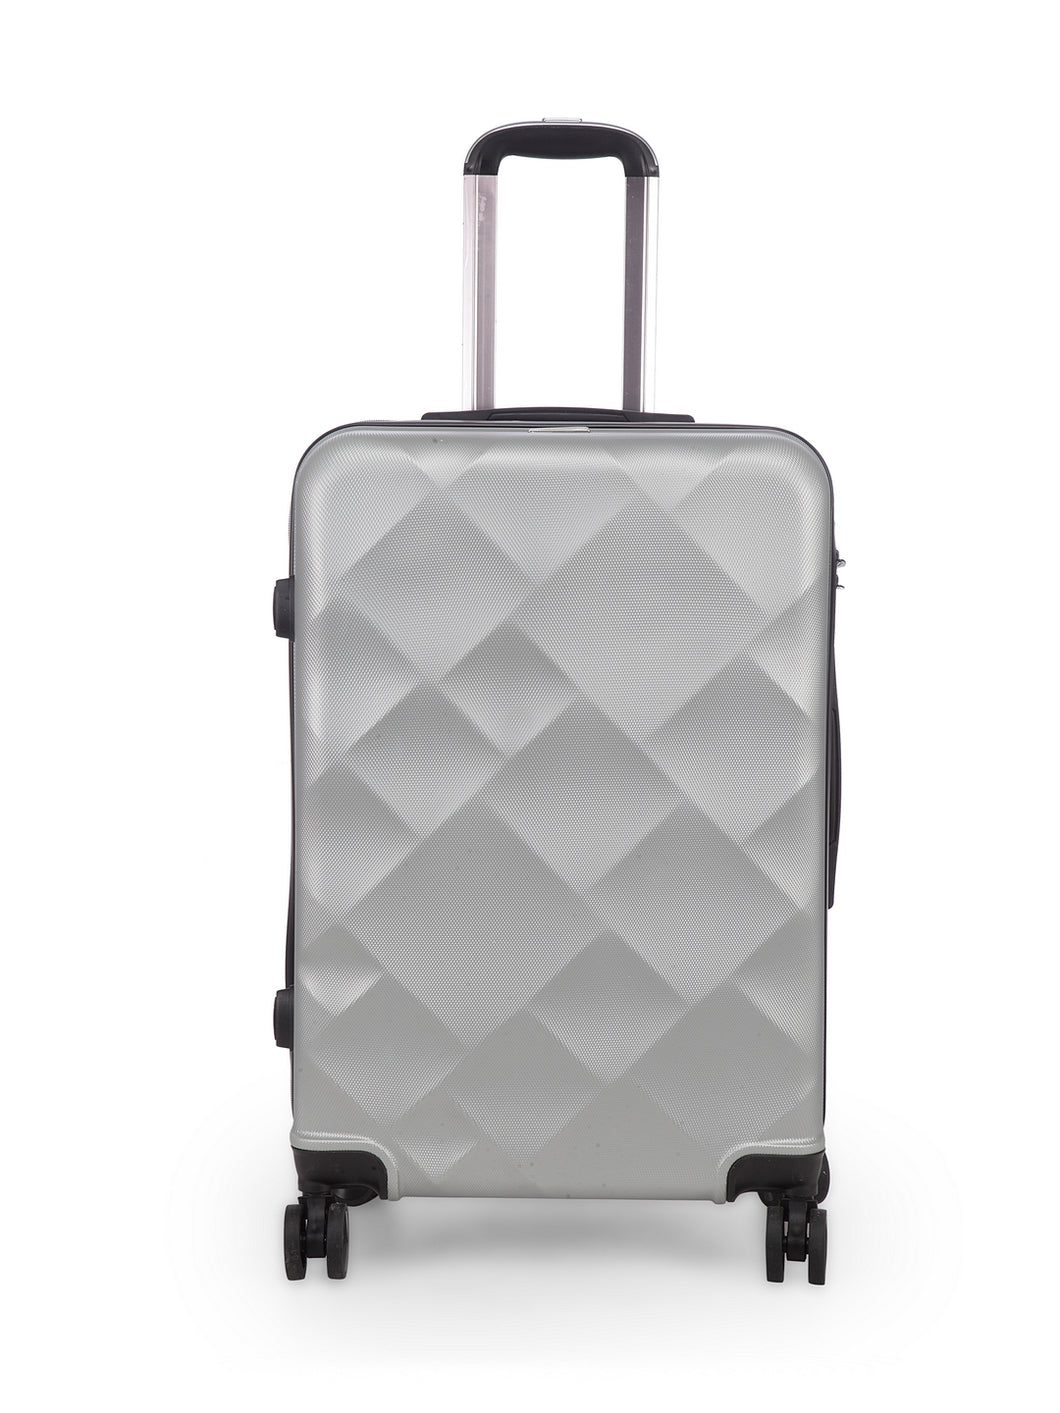 Unisex Silver Textured Hard-Sided Large Trolley Suitcase